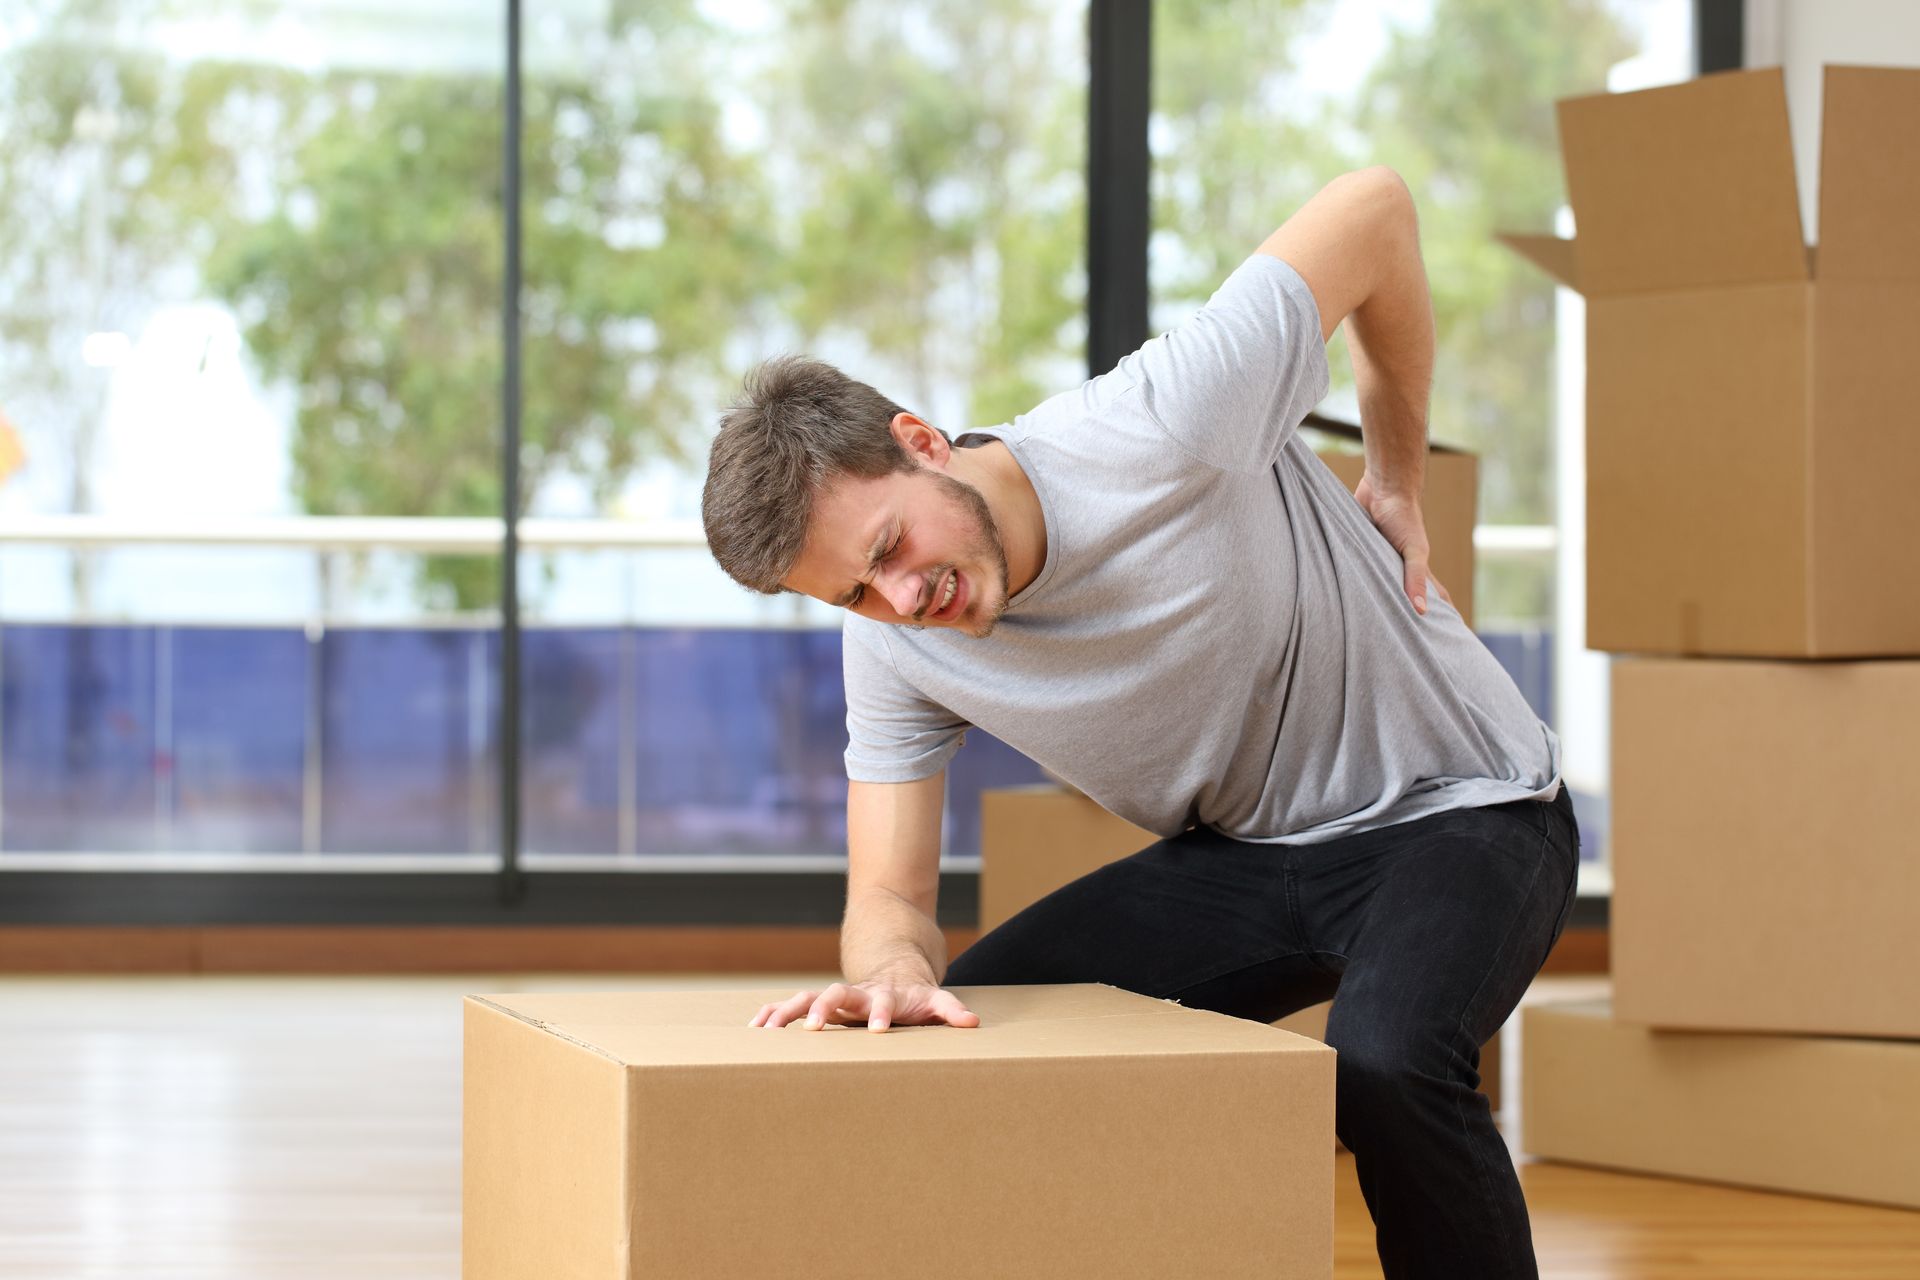 Young man experiencing a back injury after trying to move a box by himself.